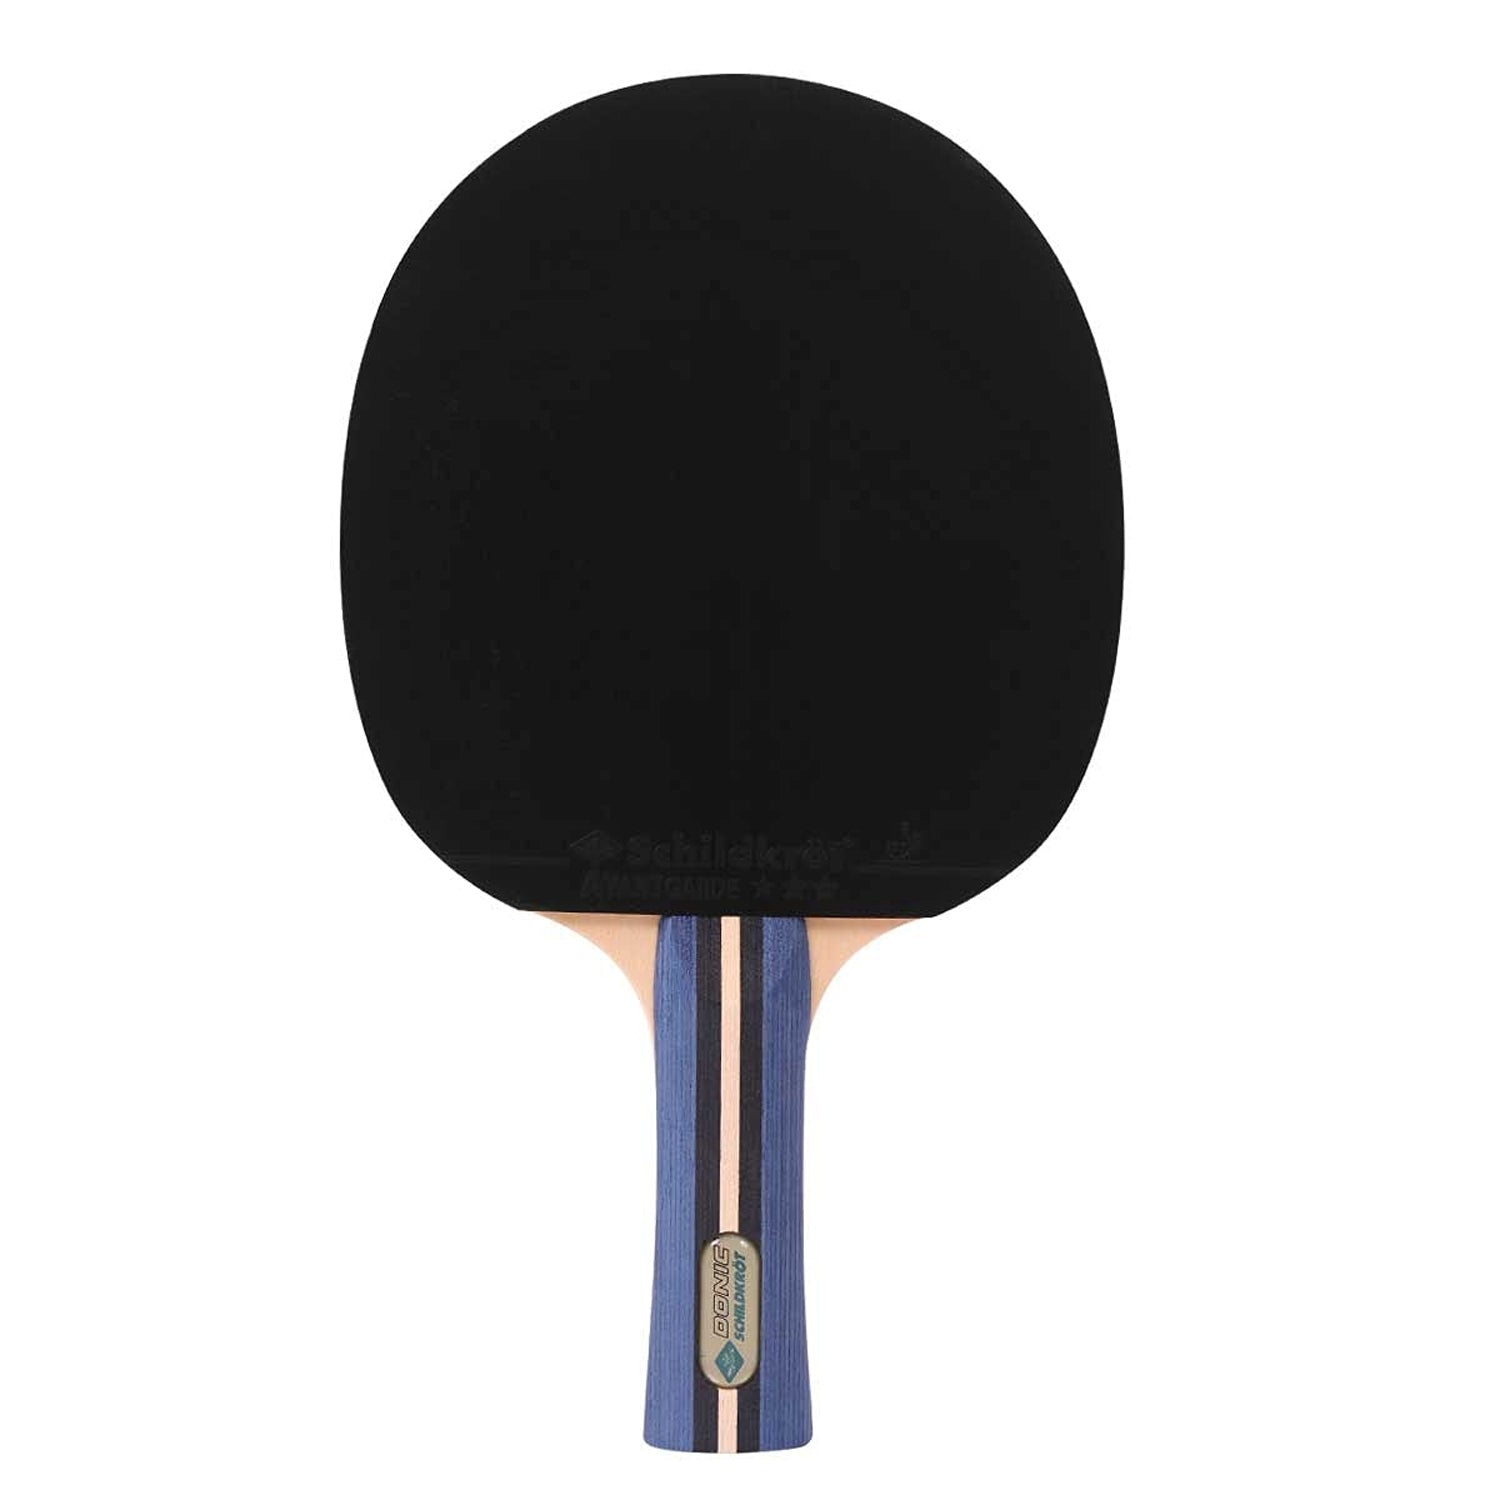 Donic Master Table Tennis Bat with Cover - Best Price online Prokicksports.com